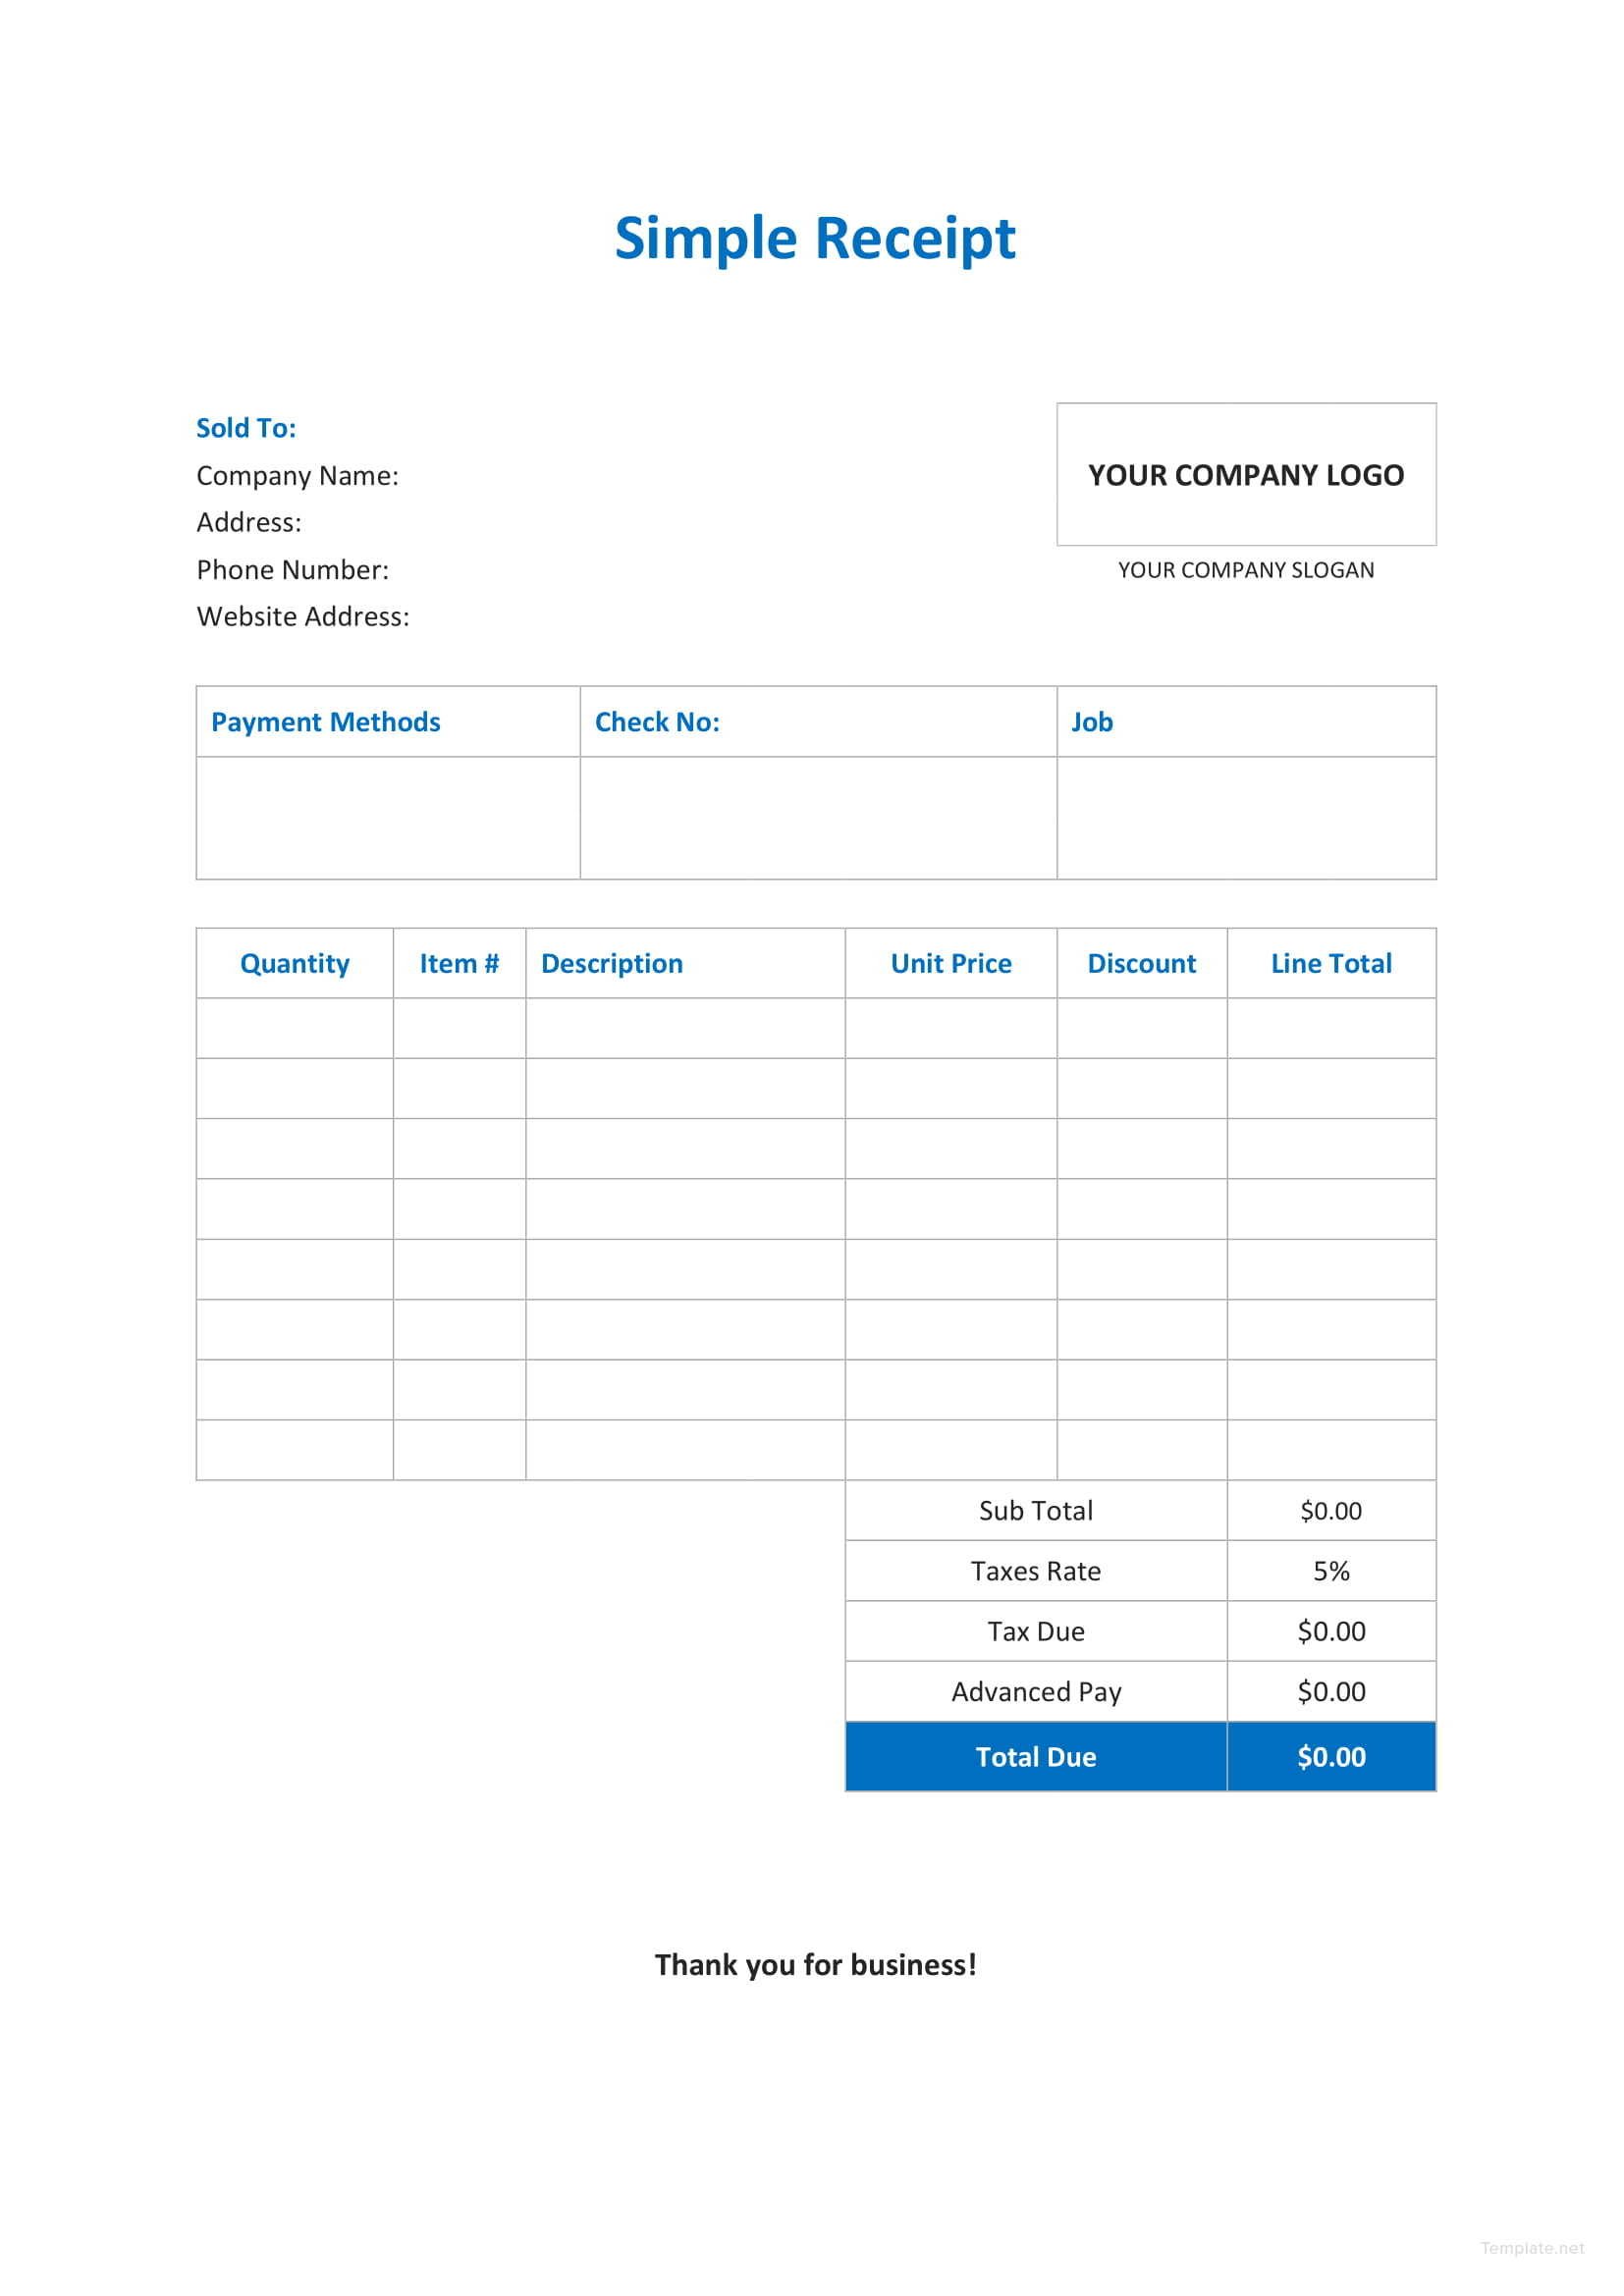 simple-receipt-template-in-microsoft-word-excel-template